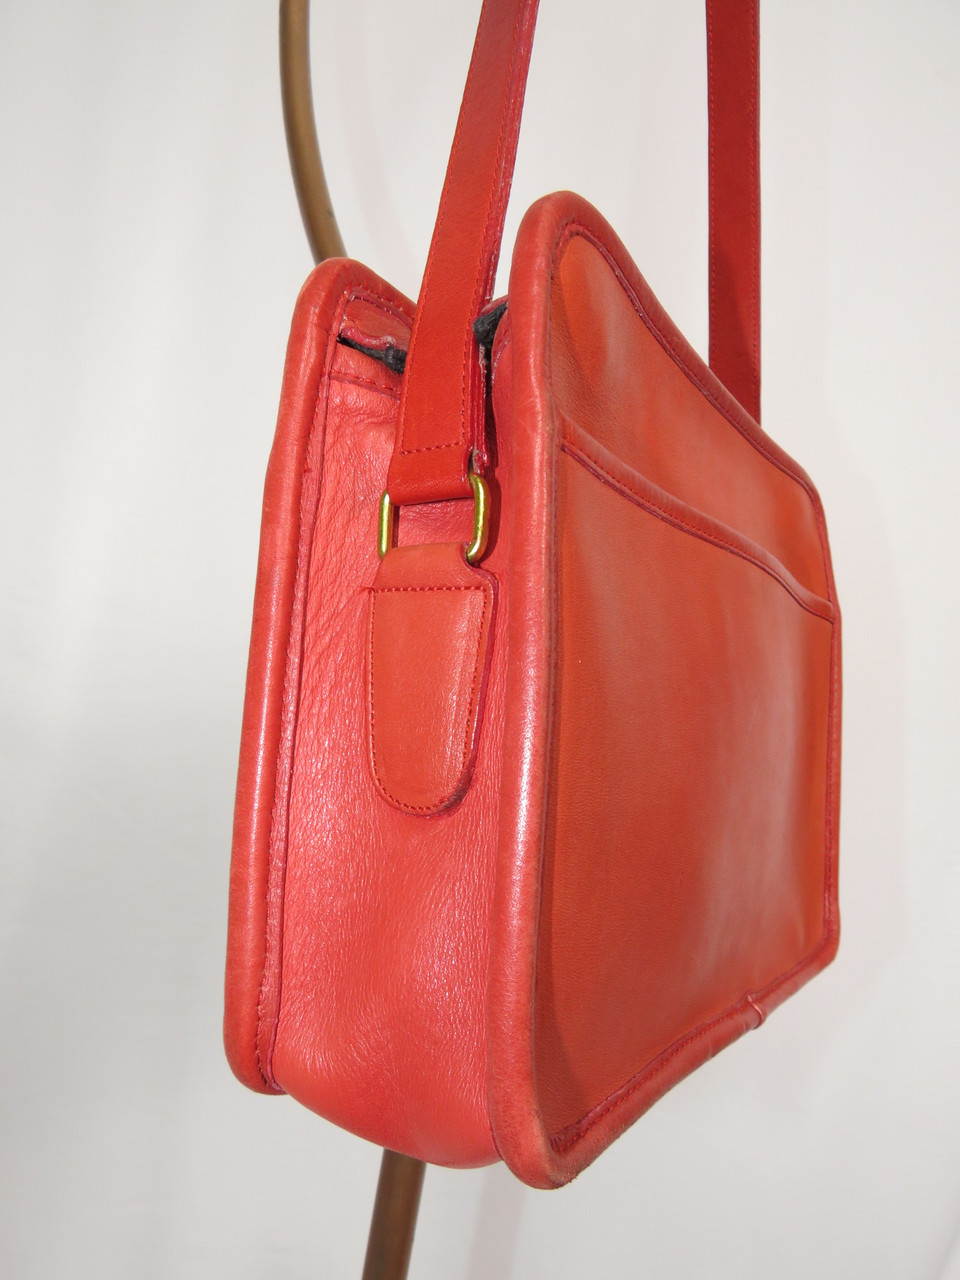 Coach Brick Red Leather Square Bag - Orlando Vintage Clothing and Costume